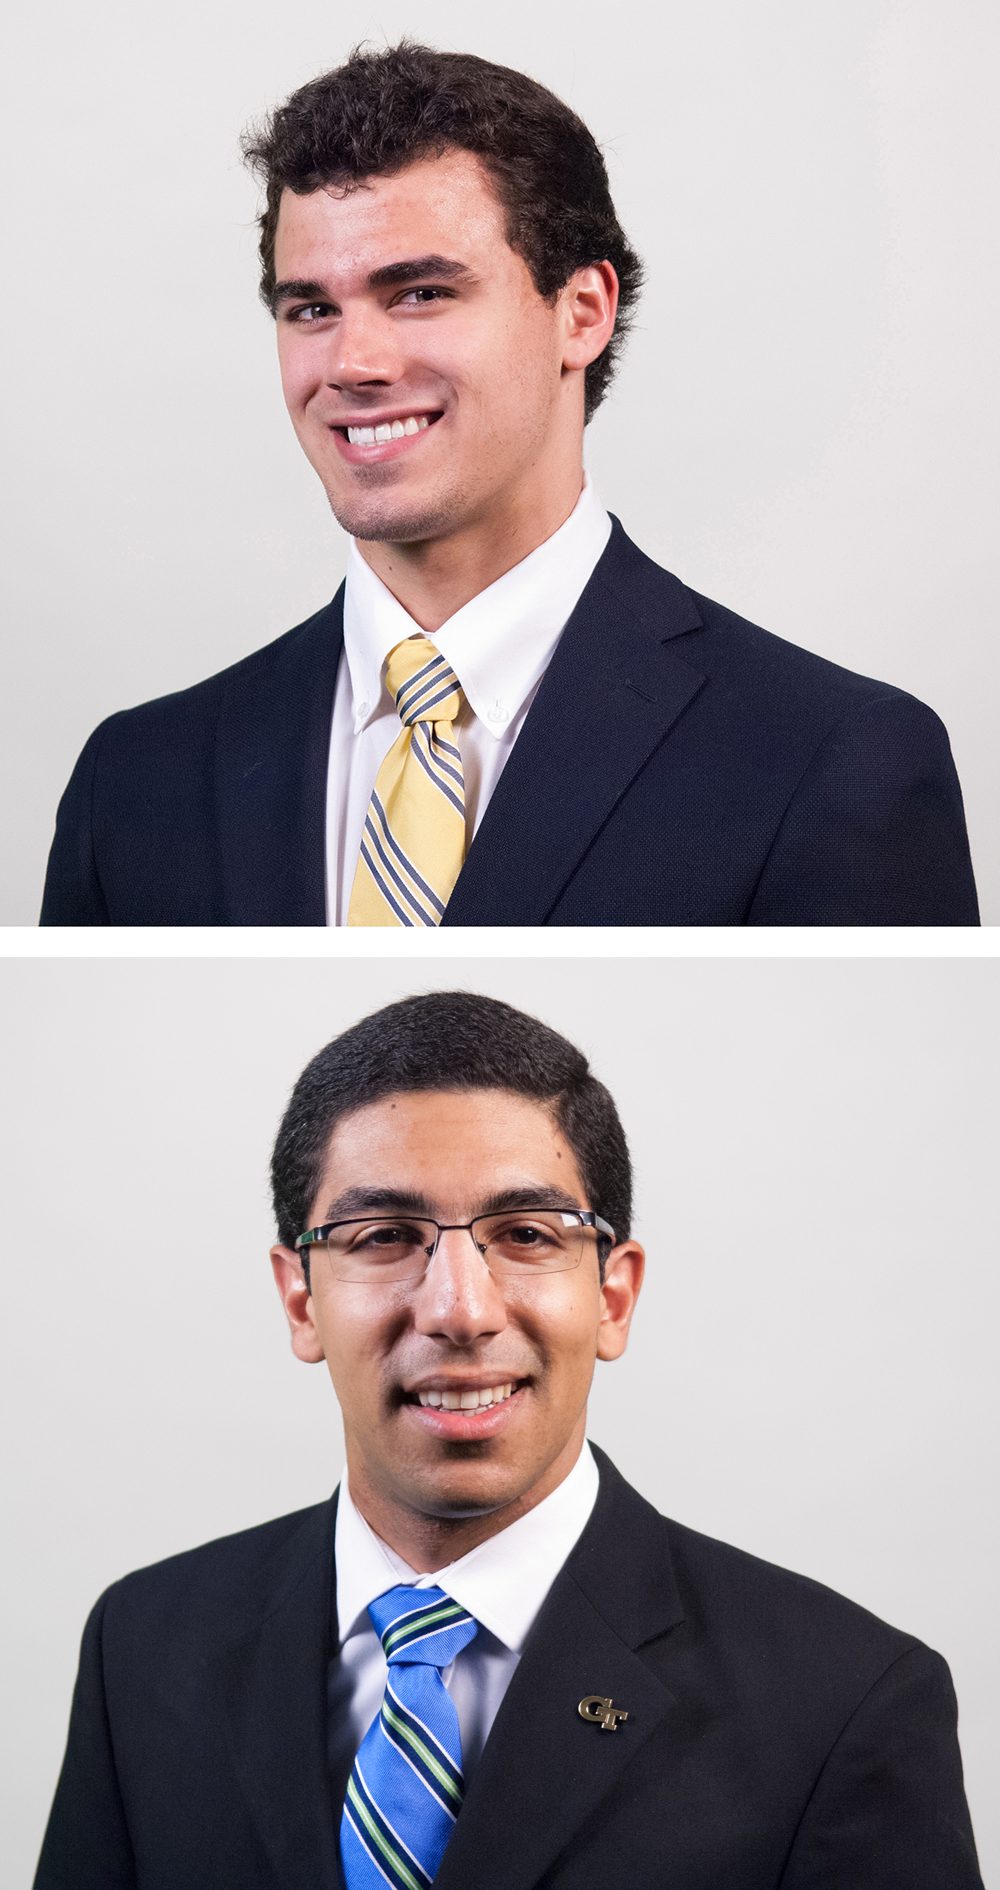 Thomas Forrest Kieffer (top) and Mohamad Ali Najia (bottom), 2014 Goldwater Scholars, both aspire to conduct research in their fields and teach at a university level.